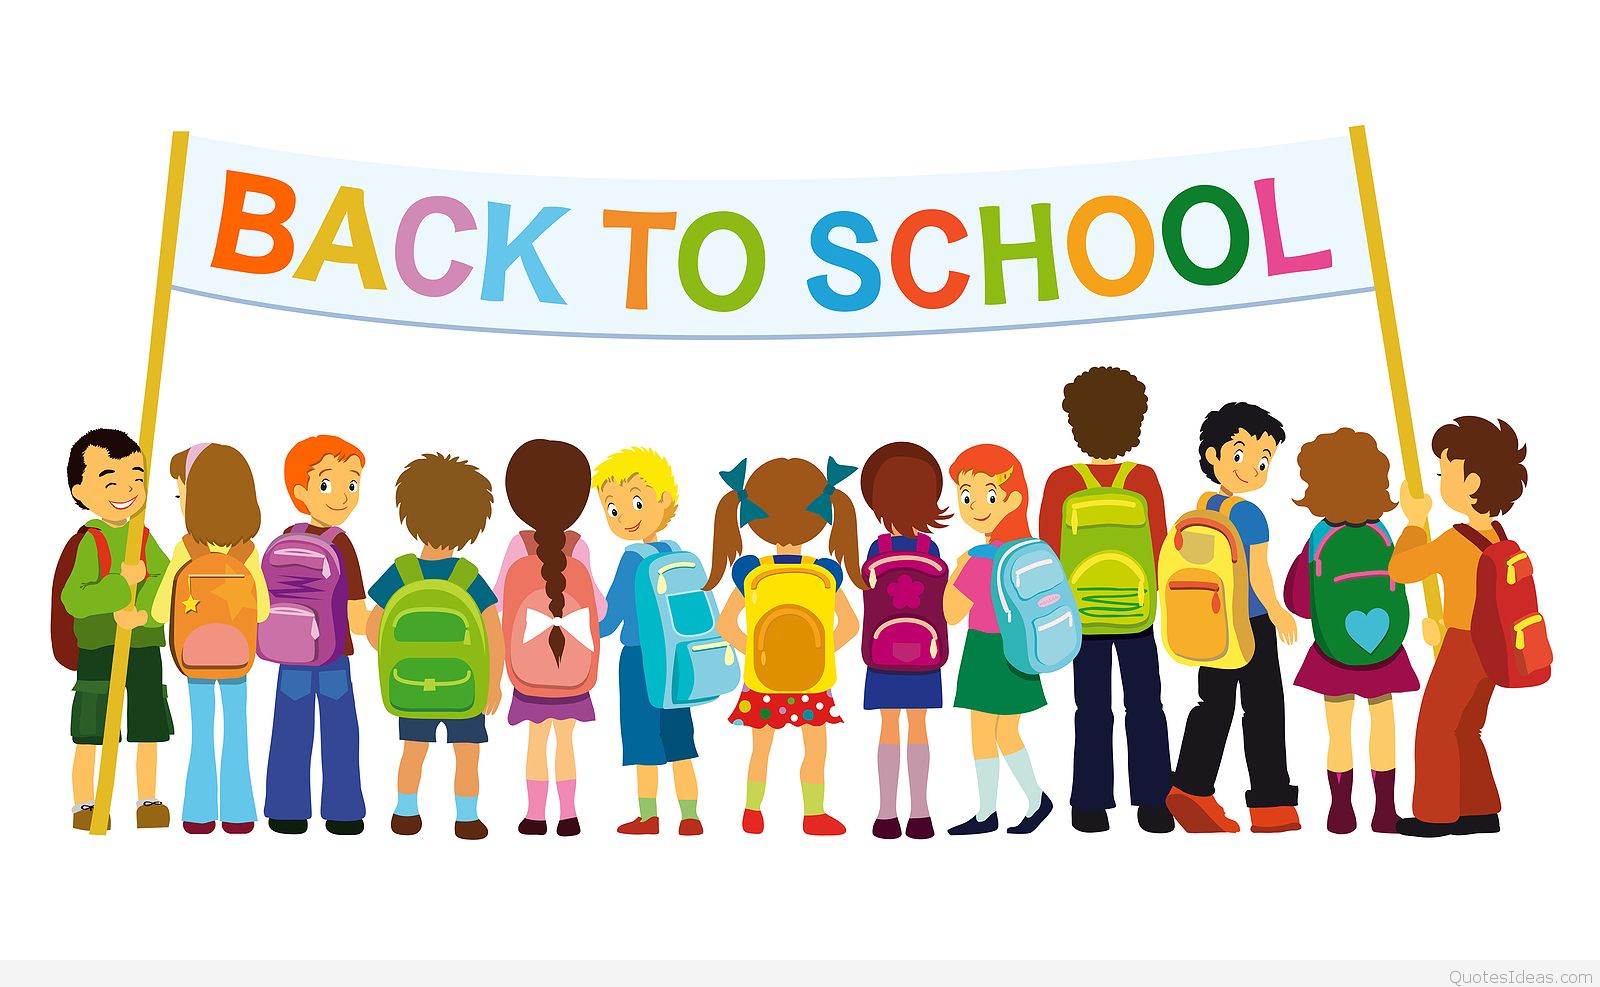 Back to school saying cover wallpaper 2015 2016